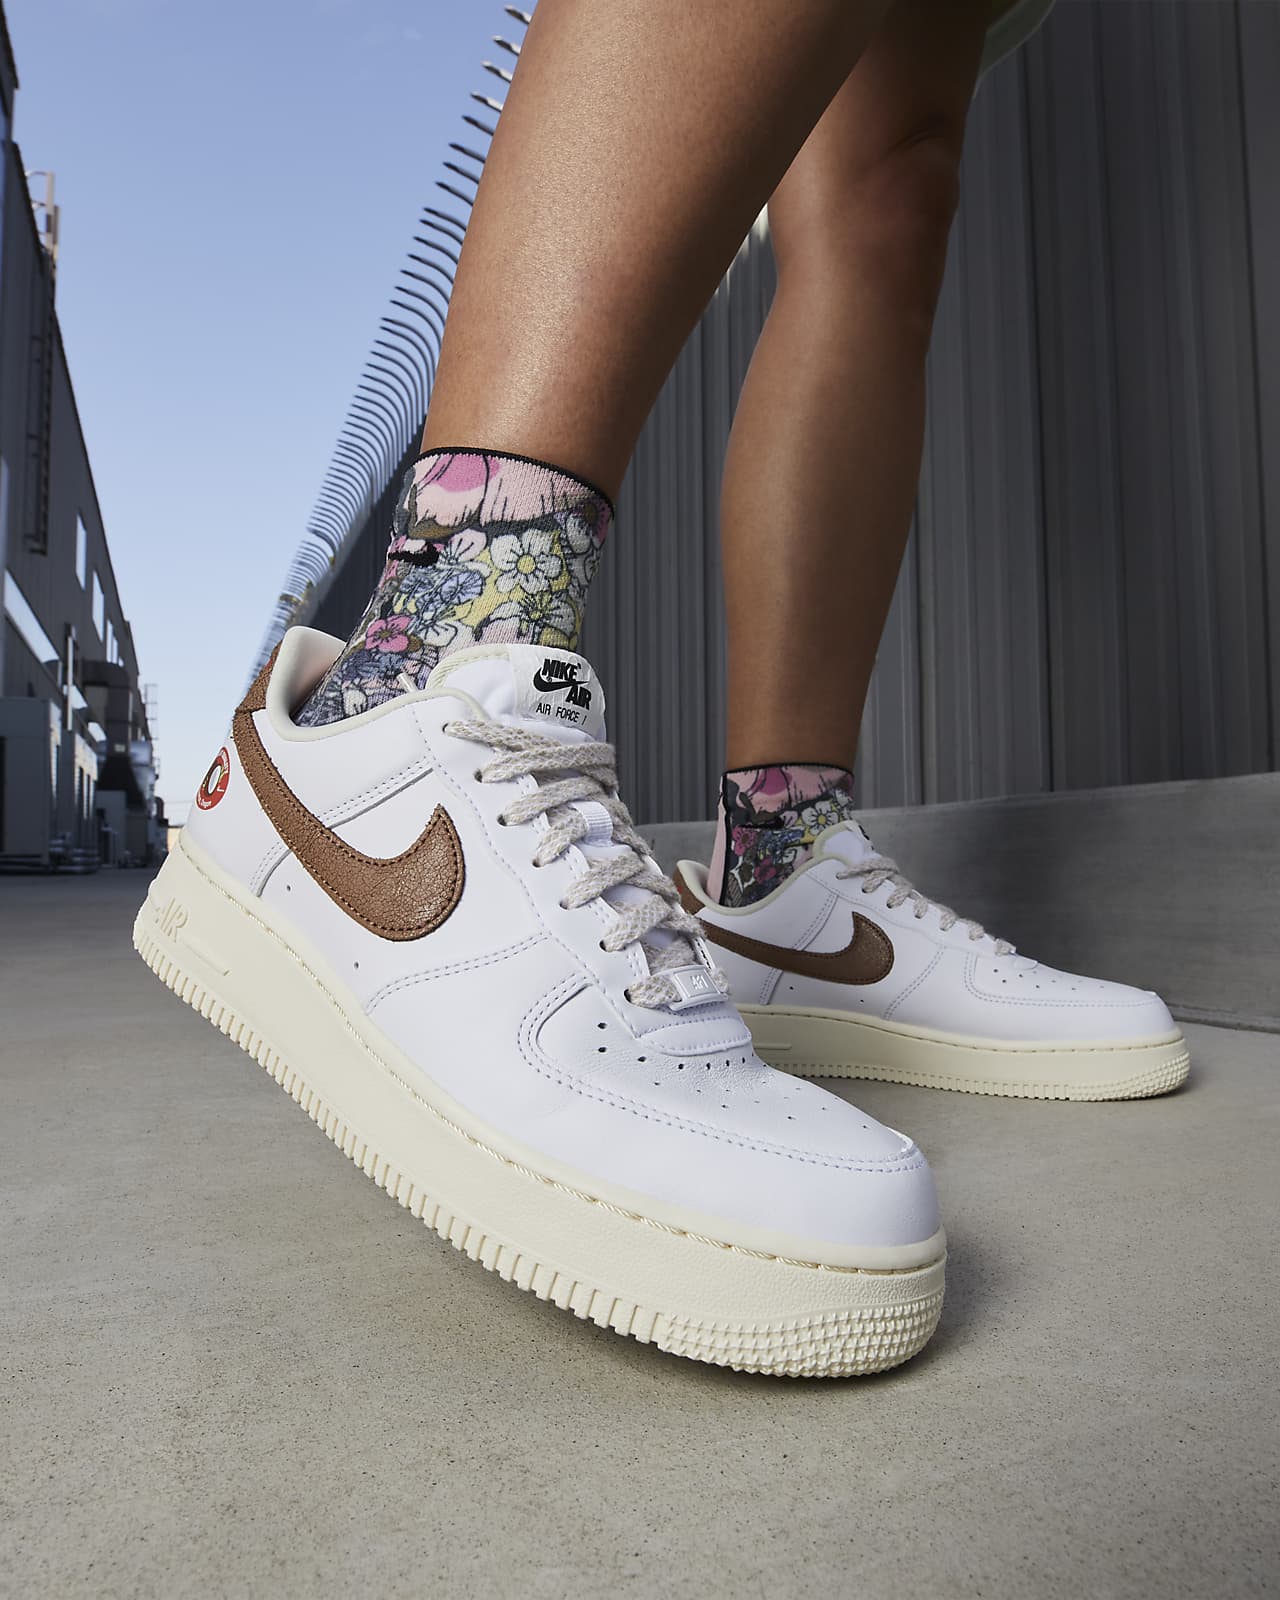 Río arriba sombra Bajo mandato Chaussure Nike Air Force 1 '07 LX pour Femme. Nike BE